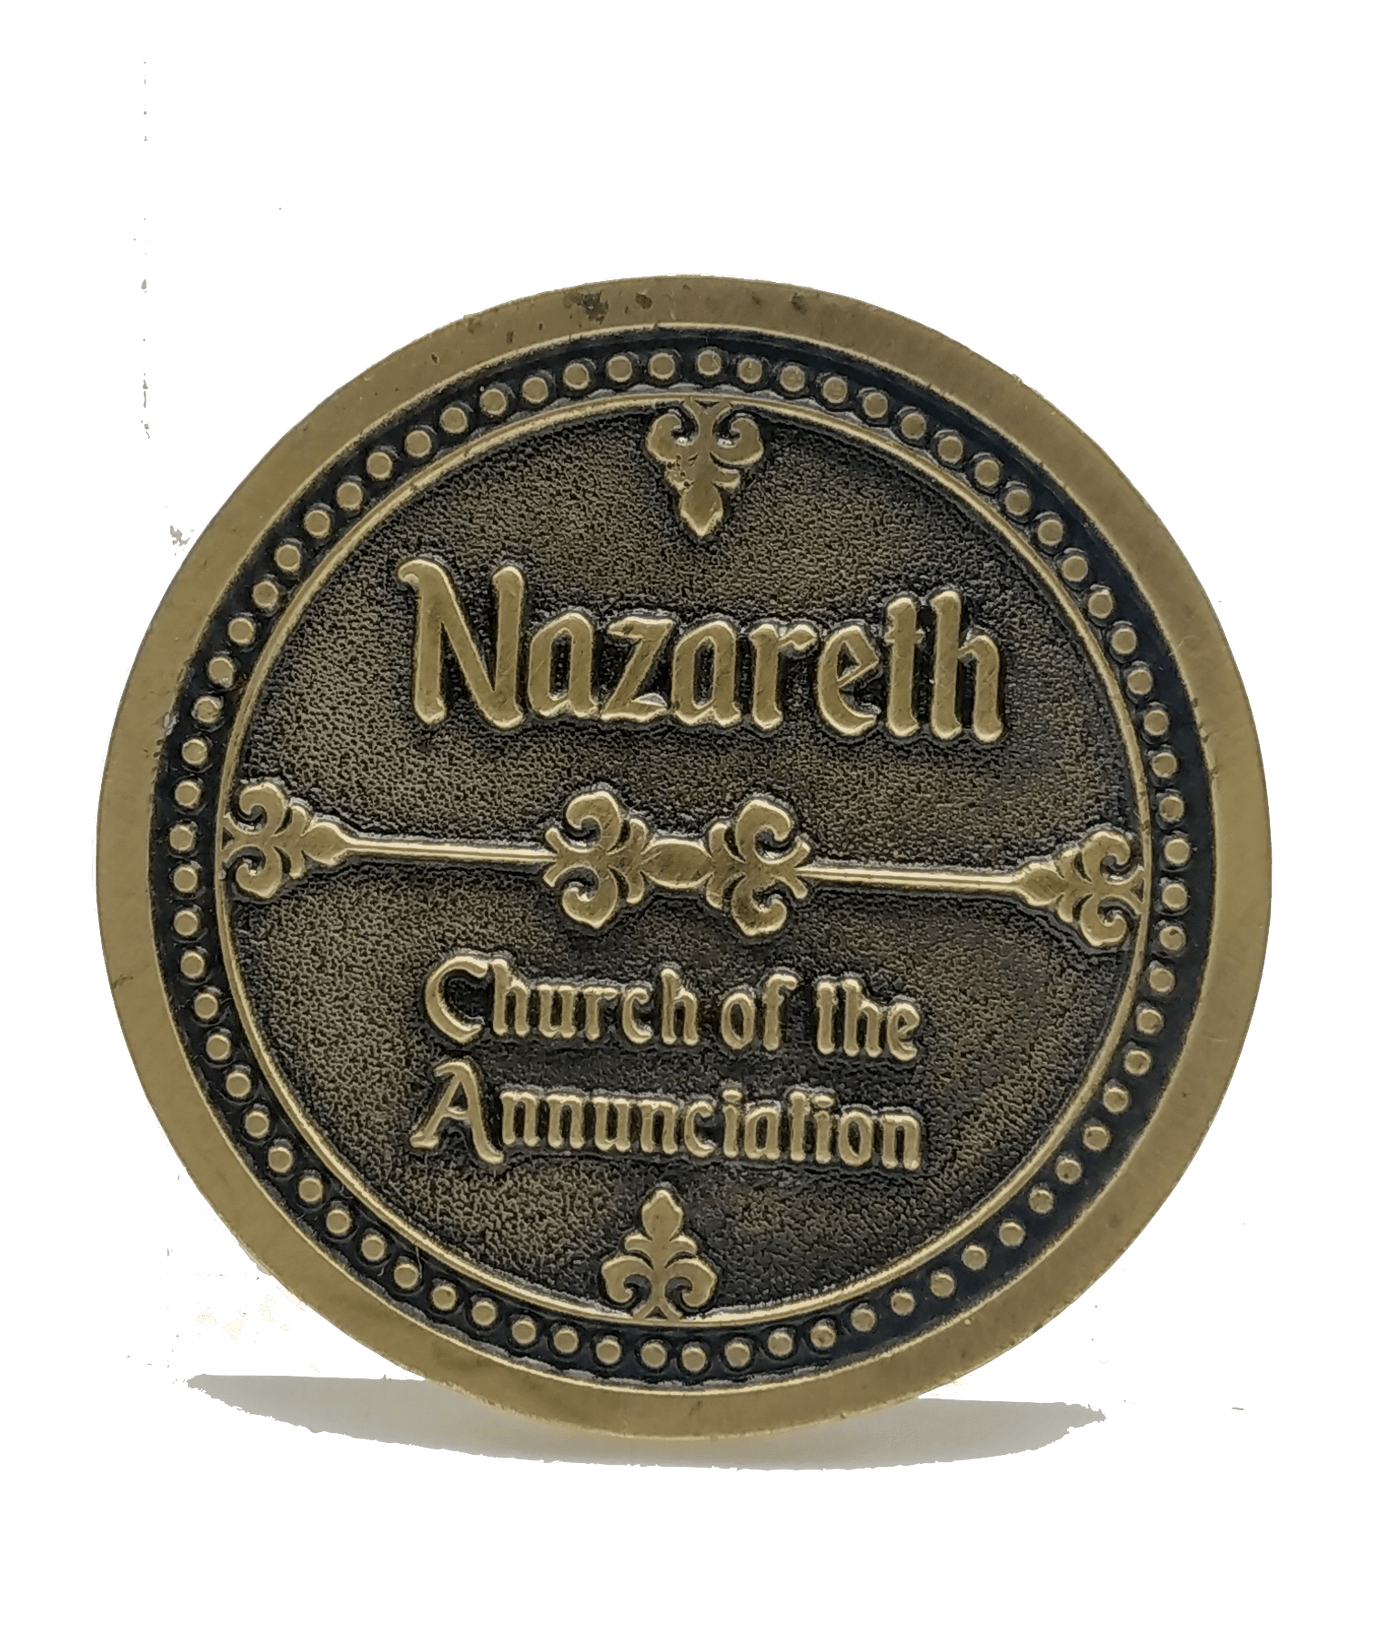 Nazareth Church of Annunciation Coin Israel Souvenir from The Holyland (Gold Color) - Spring Nahal